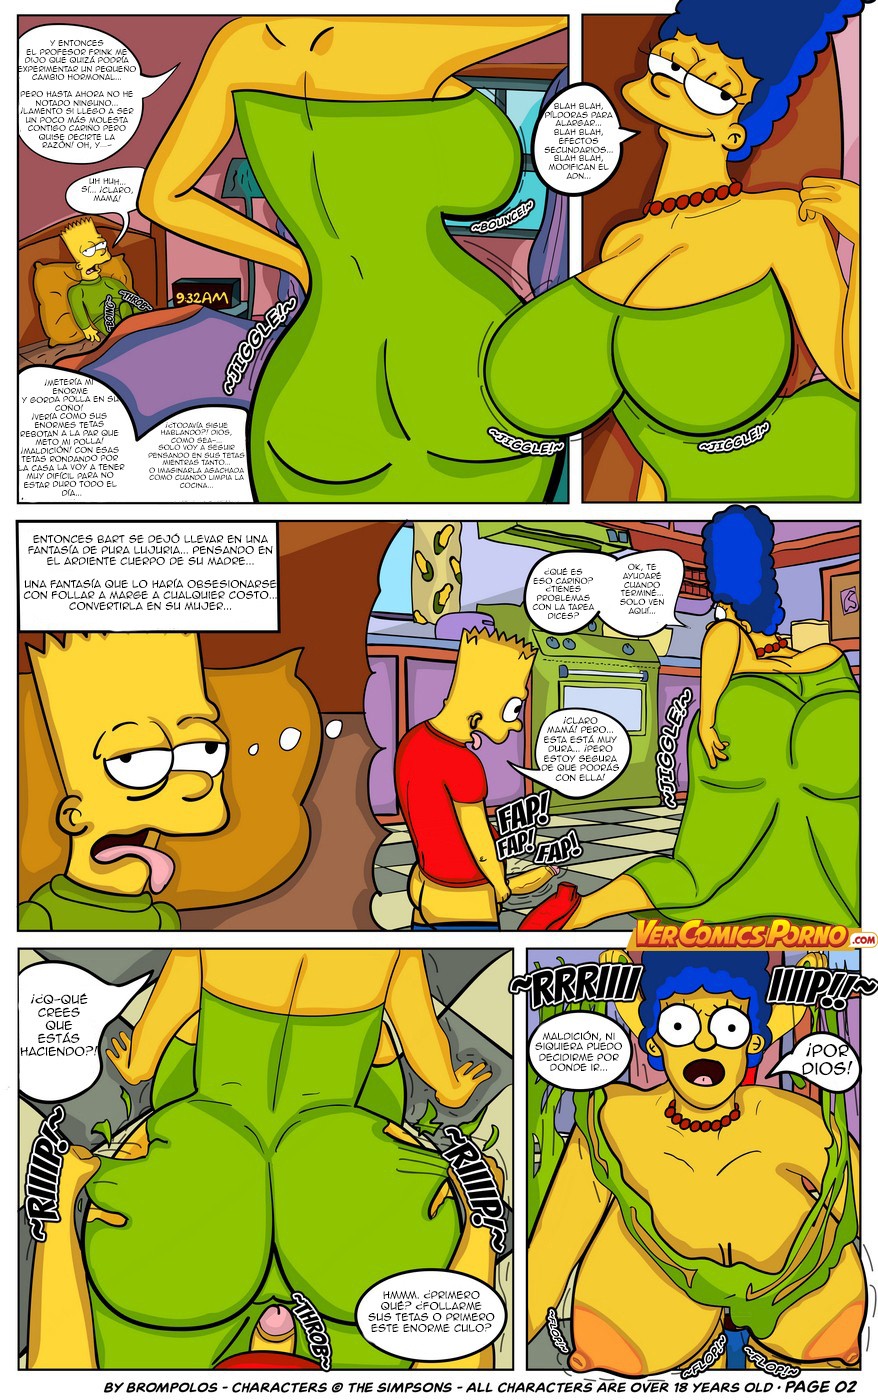 [Brompolos] The Simpsons are The Sexenteins (Traduccion Exclusiva) - 3